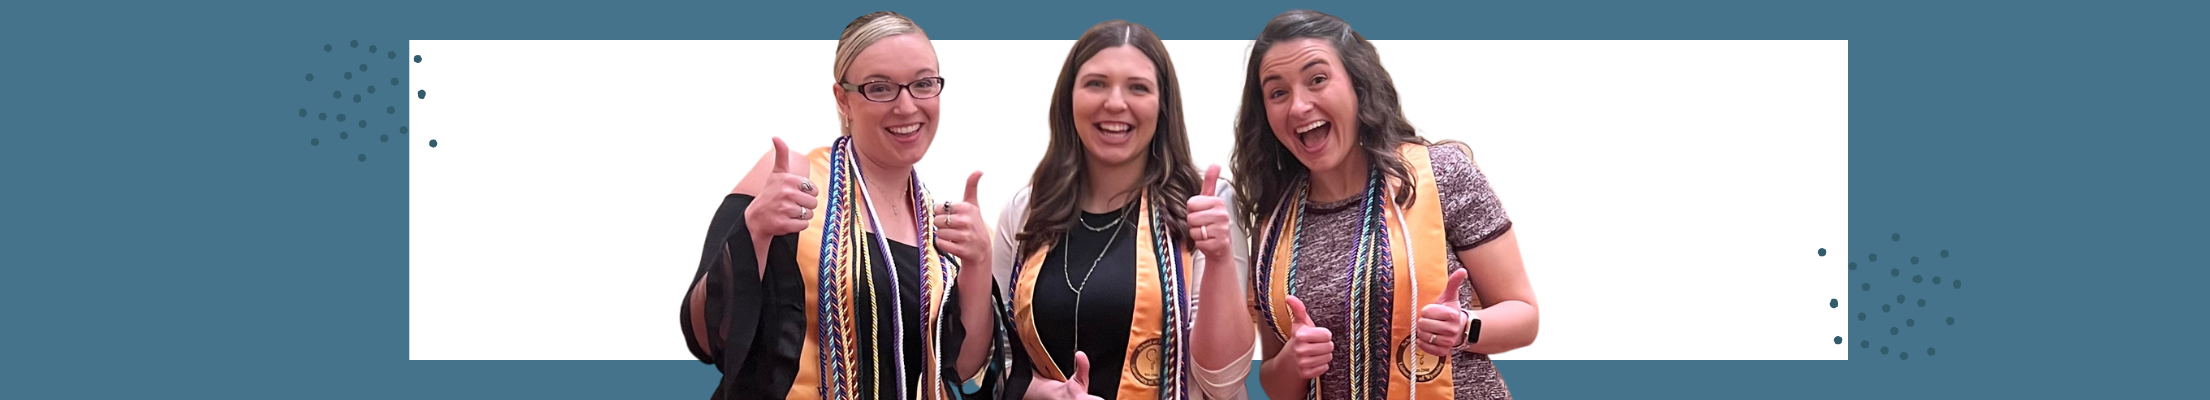 three students with cords thumbs up